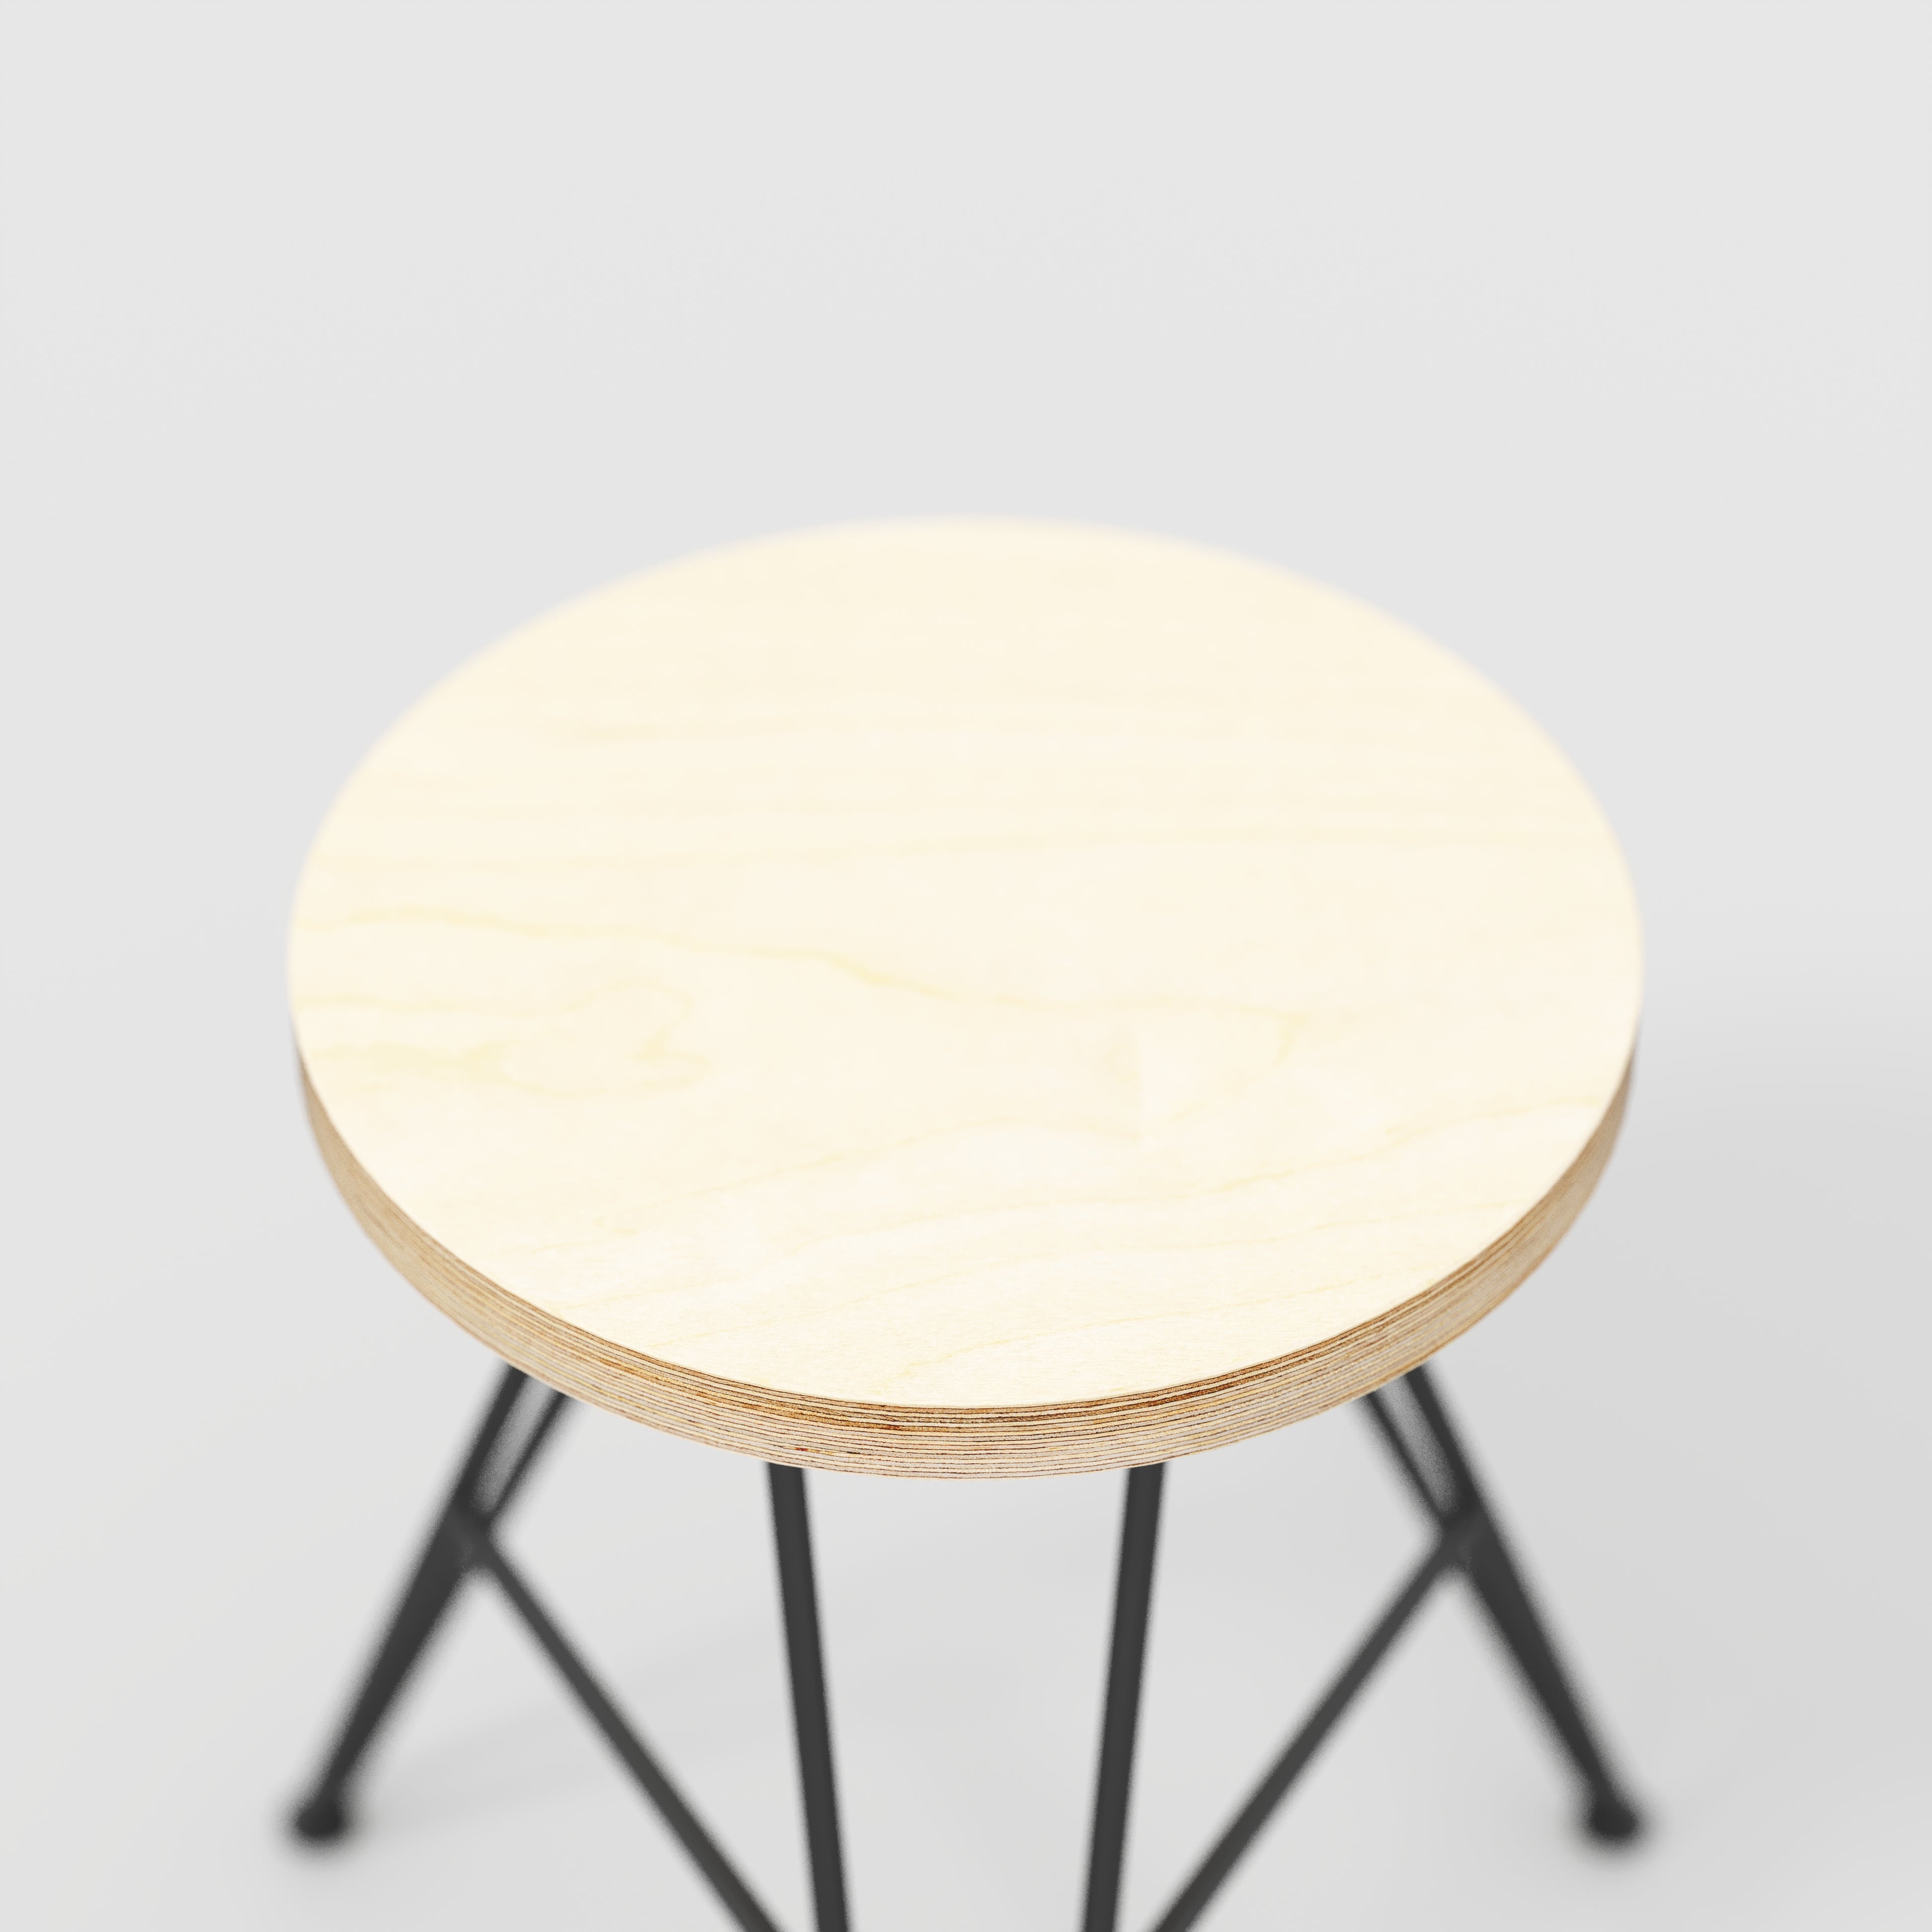 Custom Plywood Stool with Hairpin Base